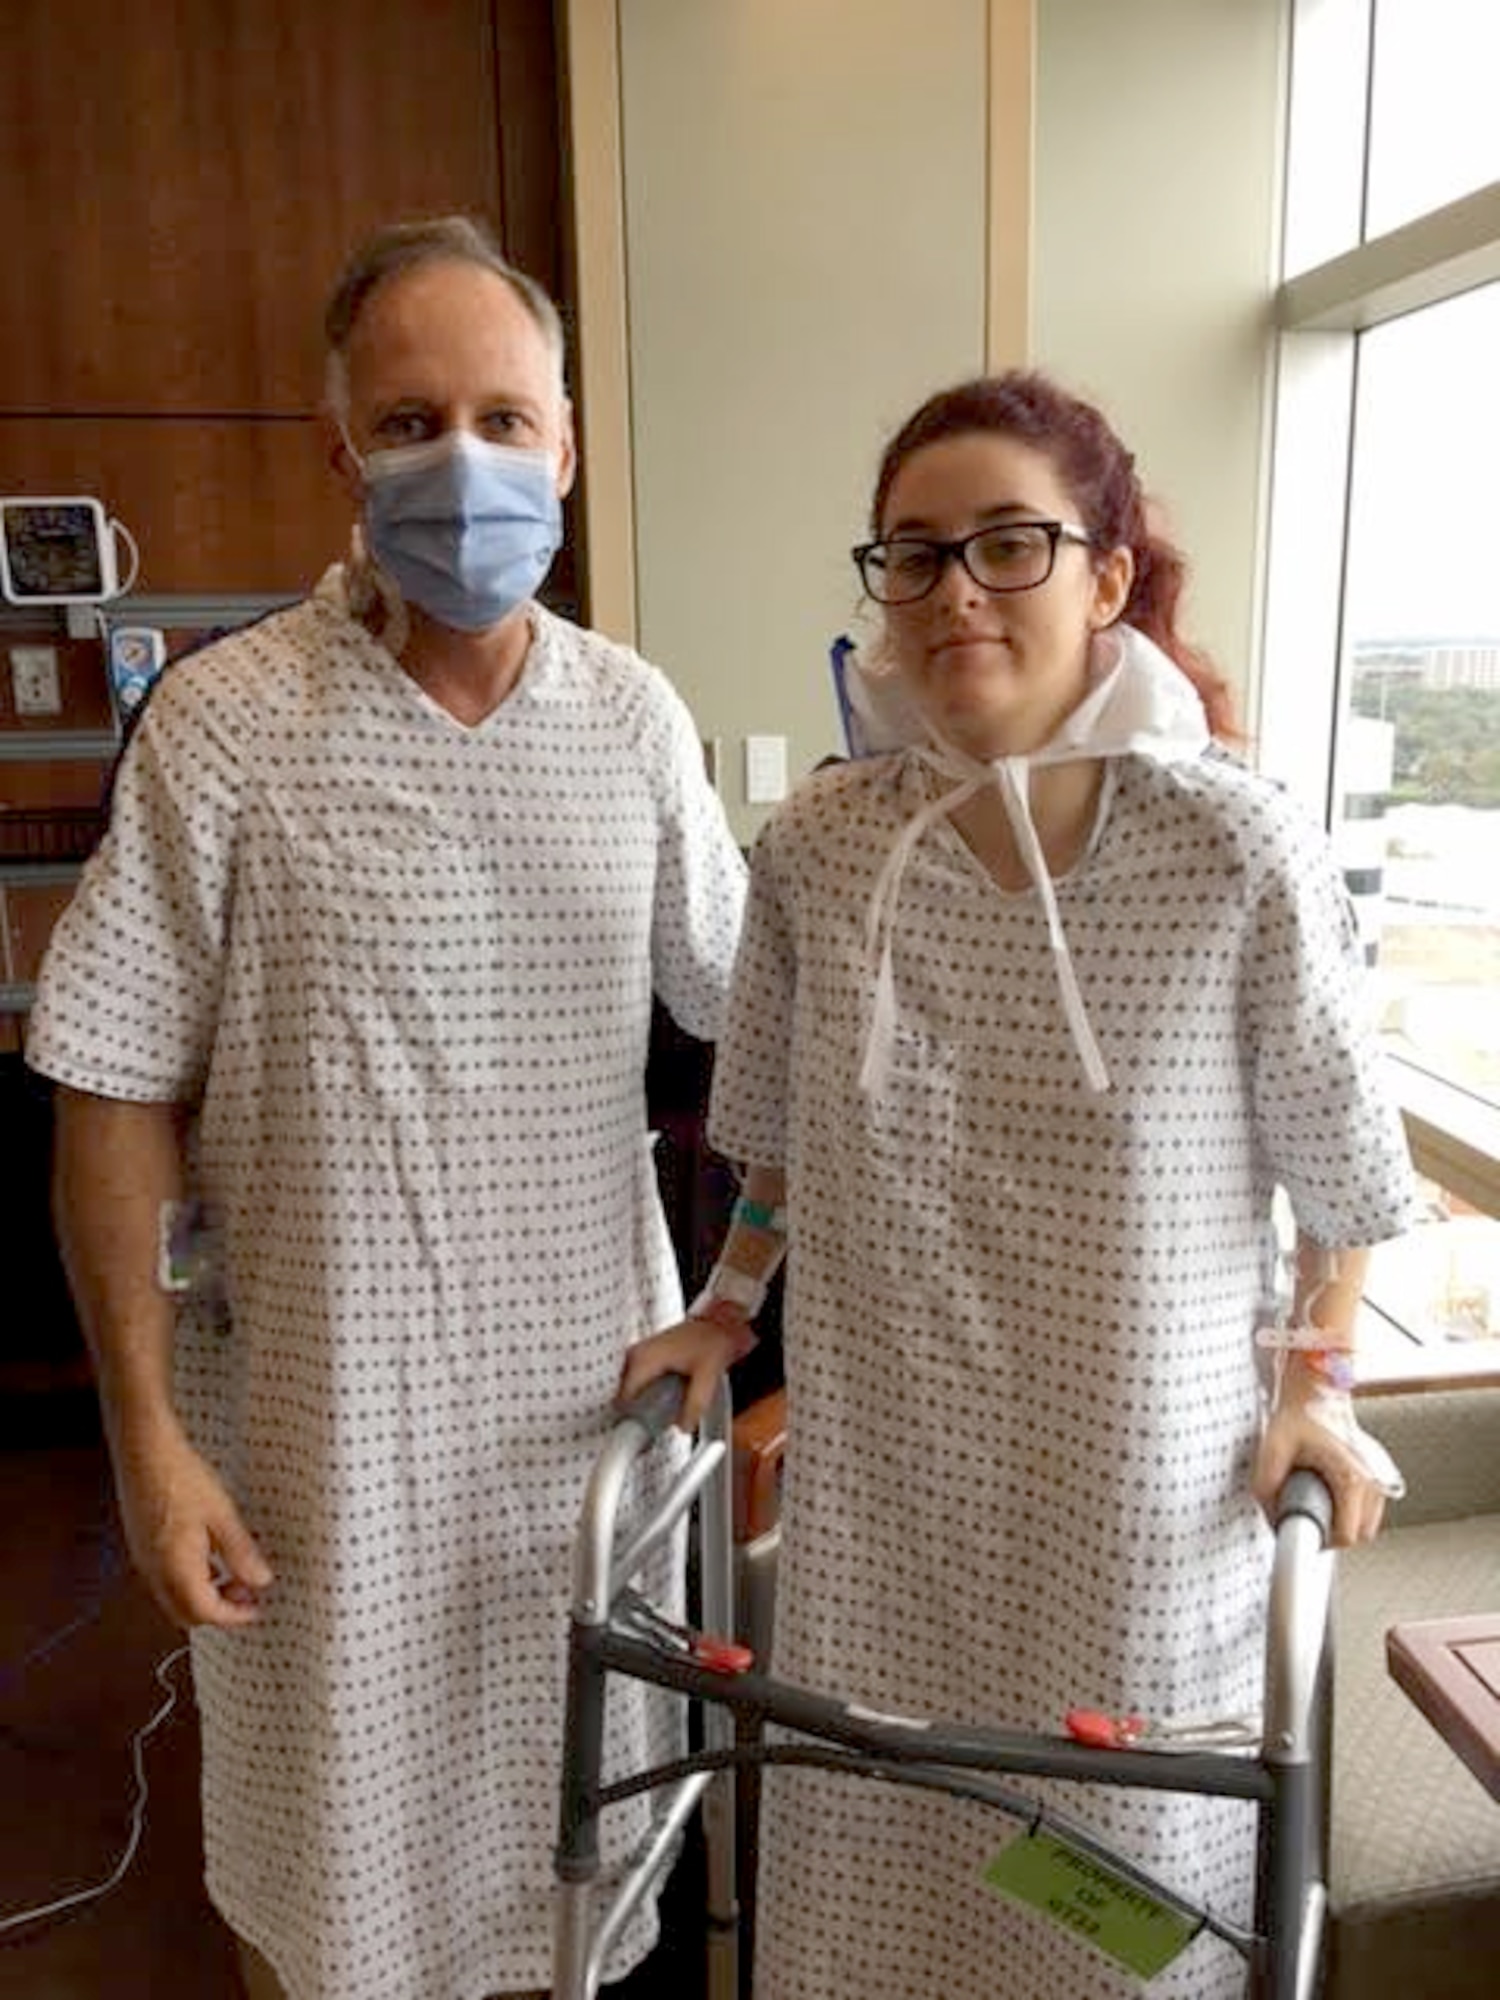 Elissa White, 19, stands with her father, Retired Master Sgt. Derrell White, after the two had surgery so Elissa could donate a kidney to her dad December 7, 2016 at Florida Hospital, Orlando. Derrell White had been suffering with a low functioning kidney due to a chronic condition. The Family was opposed to their daughter being a donor at first, but after running out of options, they accepted her gift of a kidney. (Courtesy photo)